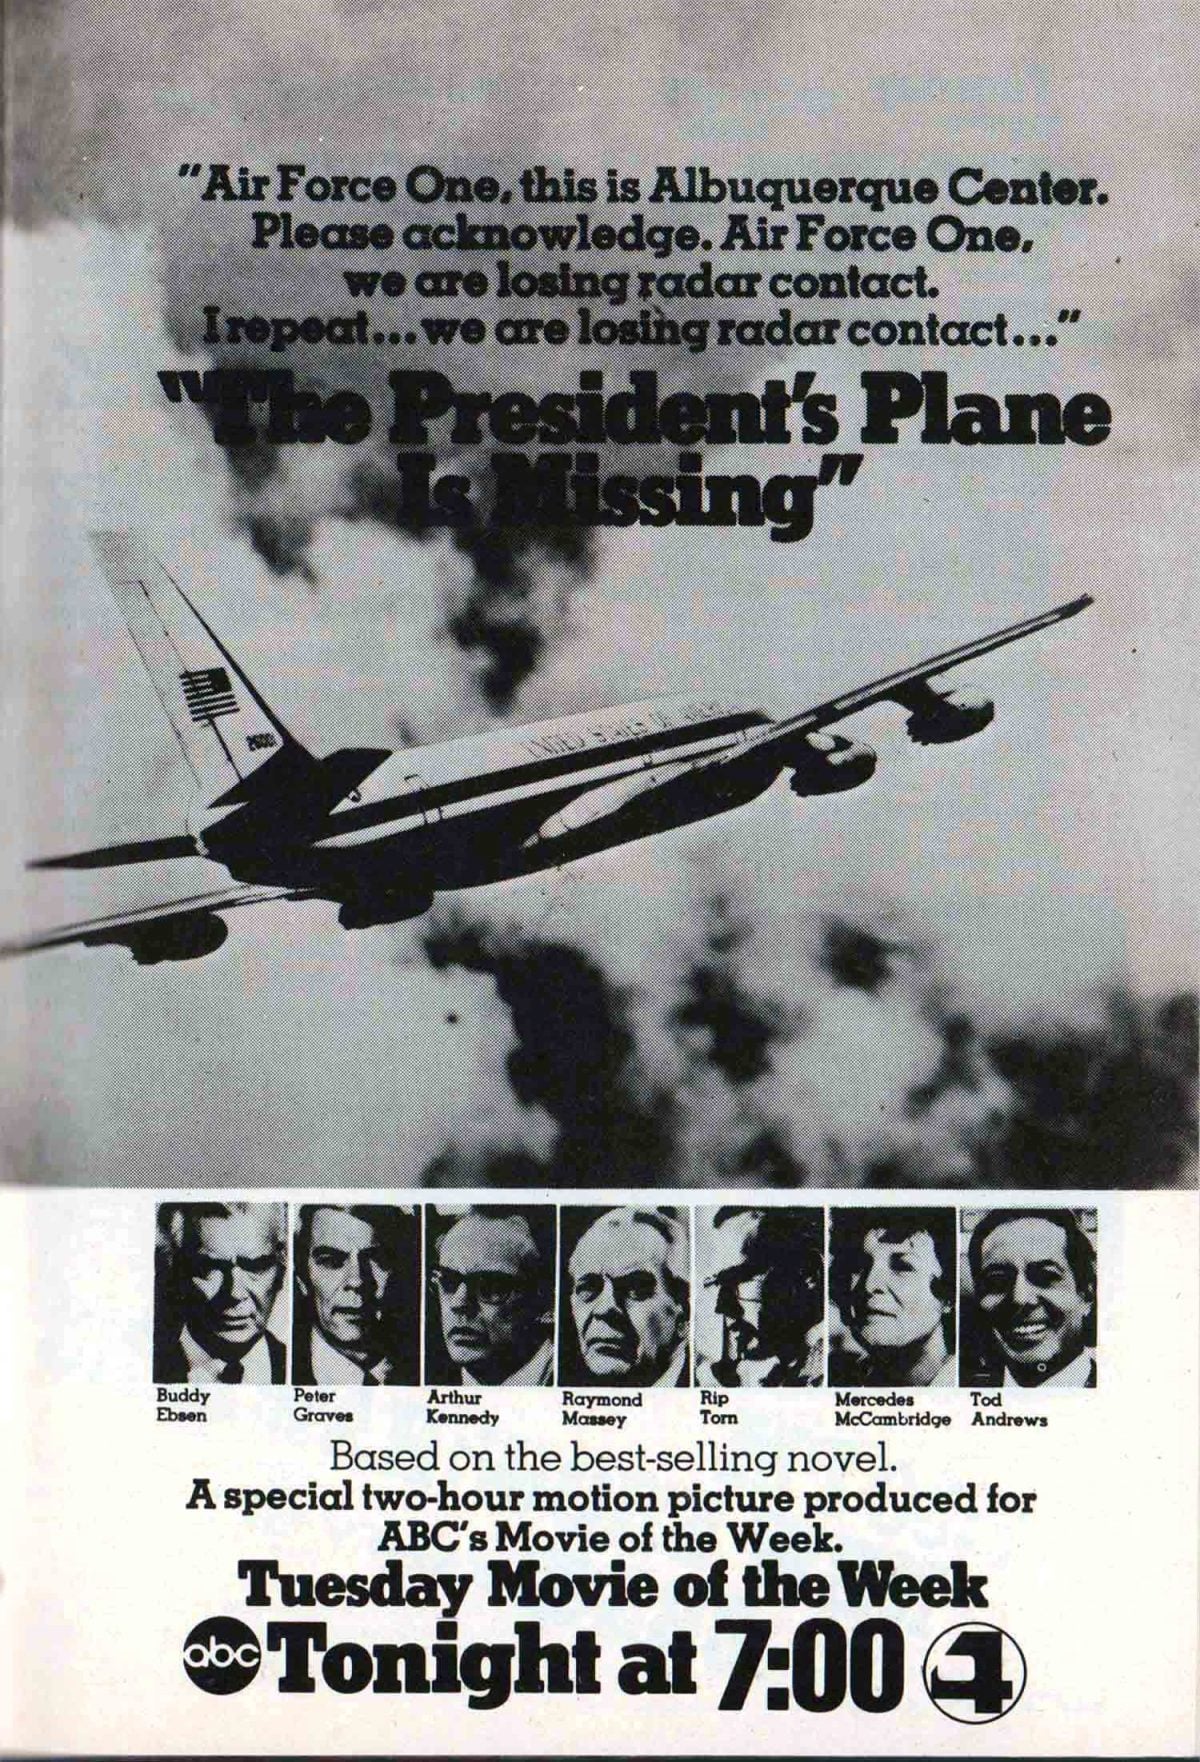 The President's Plane Is Missing (1973)